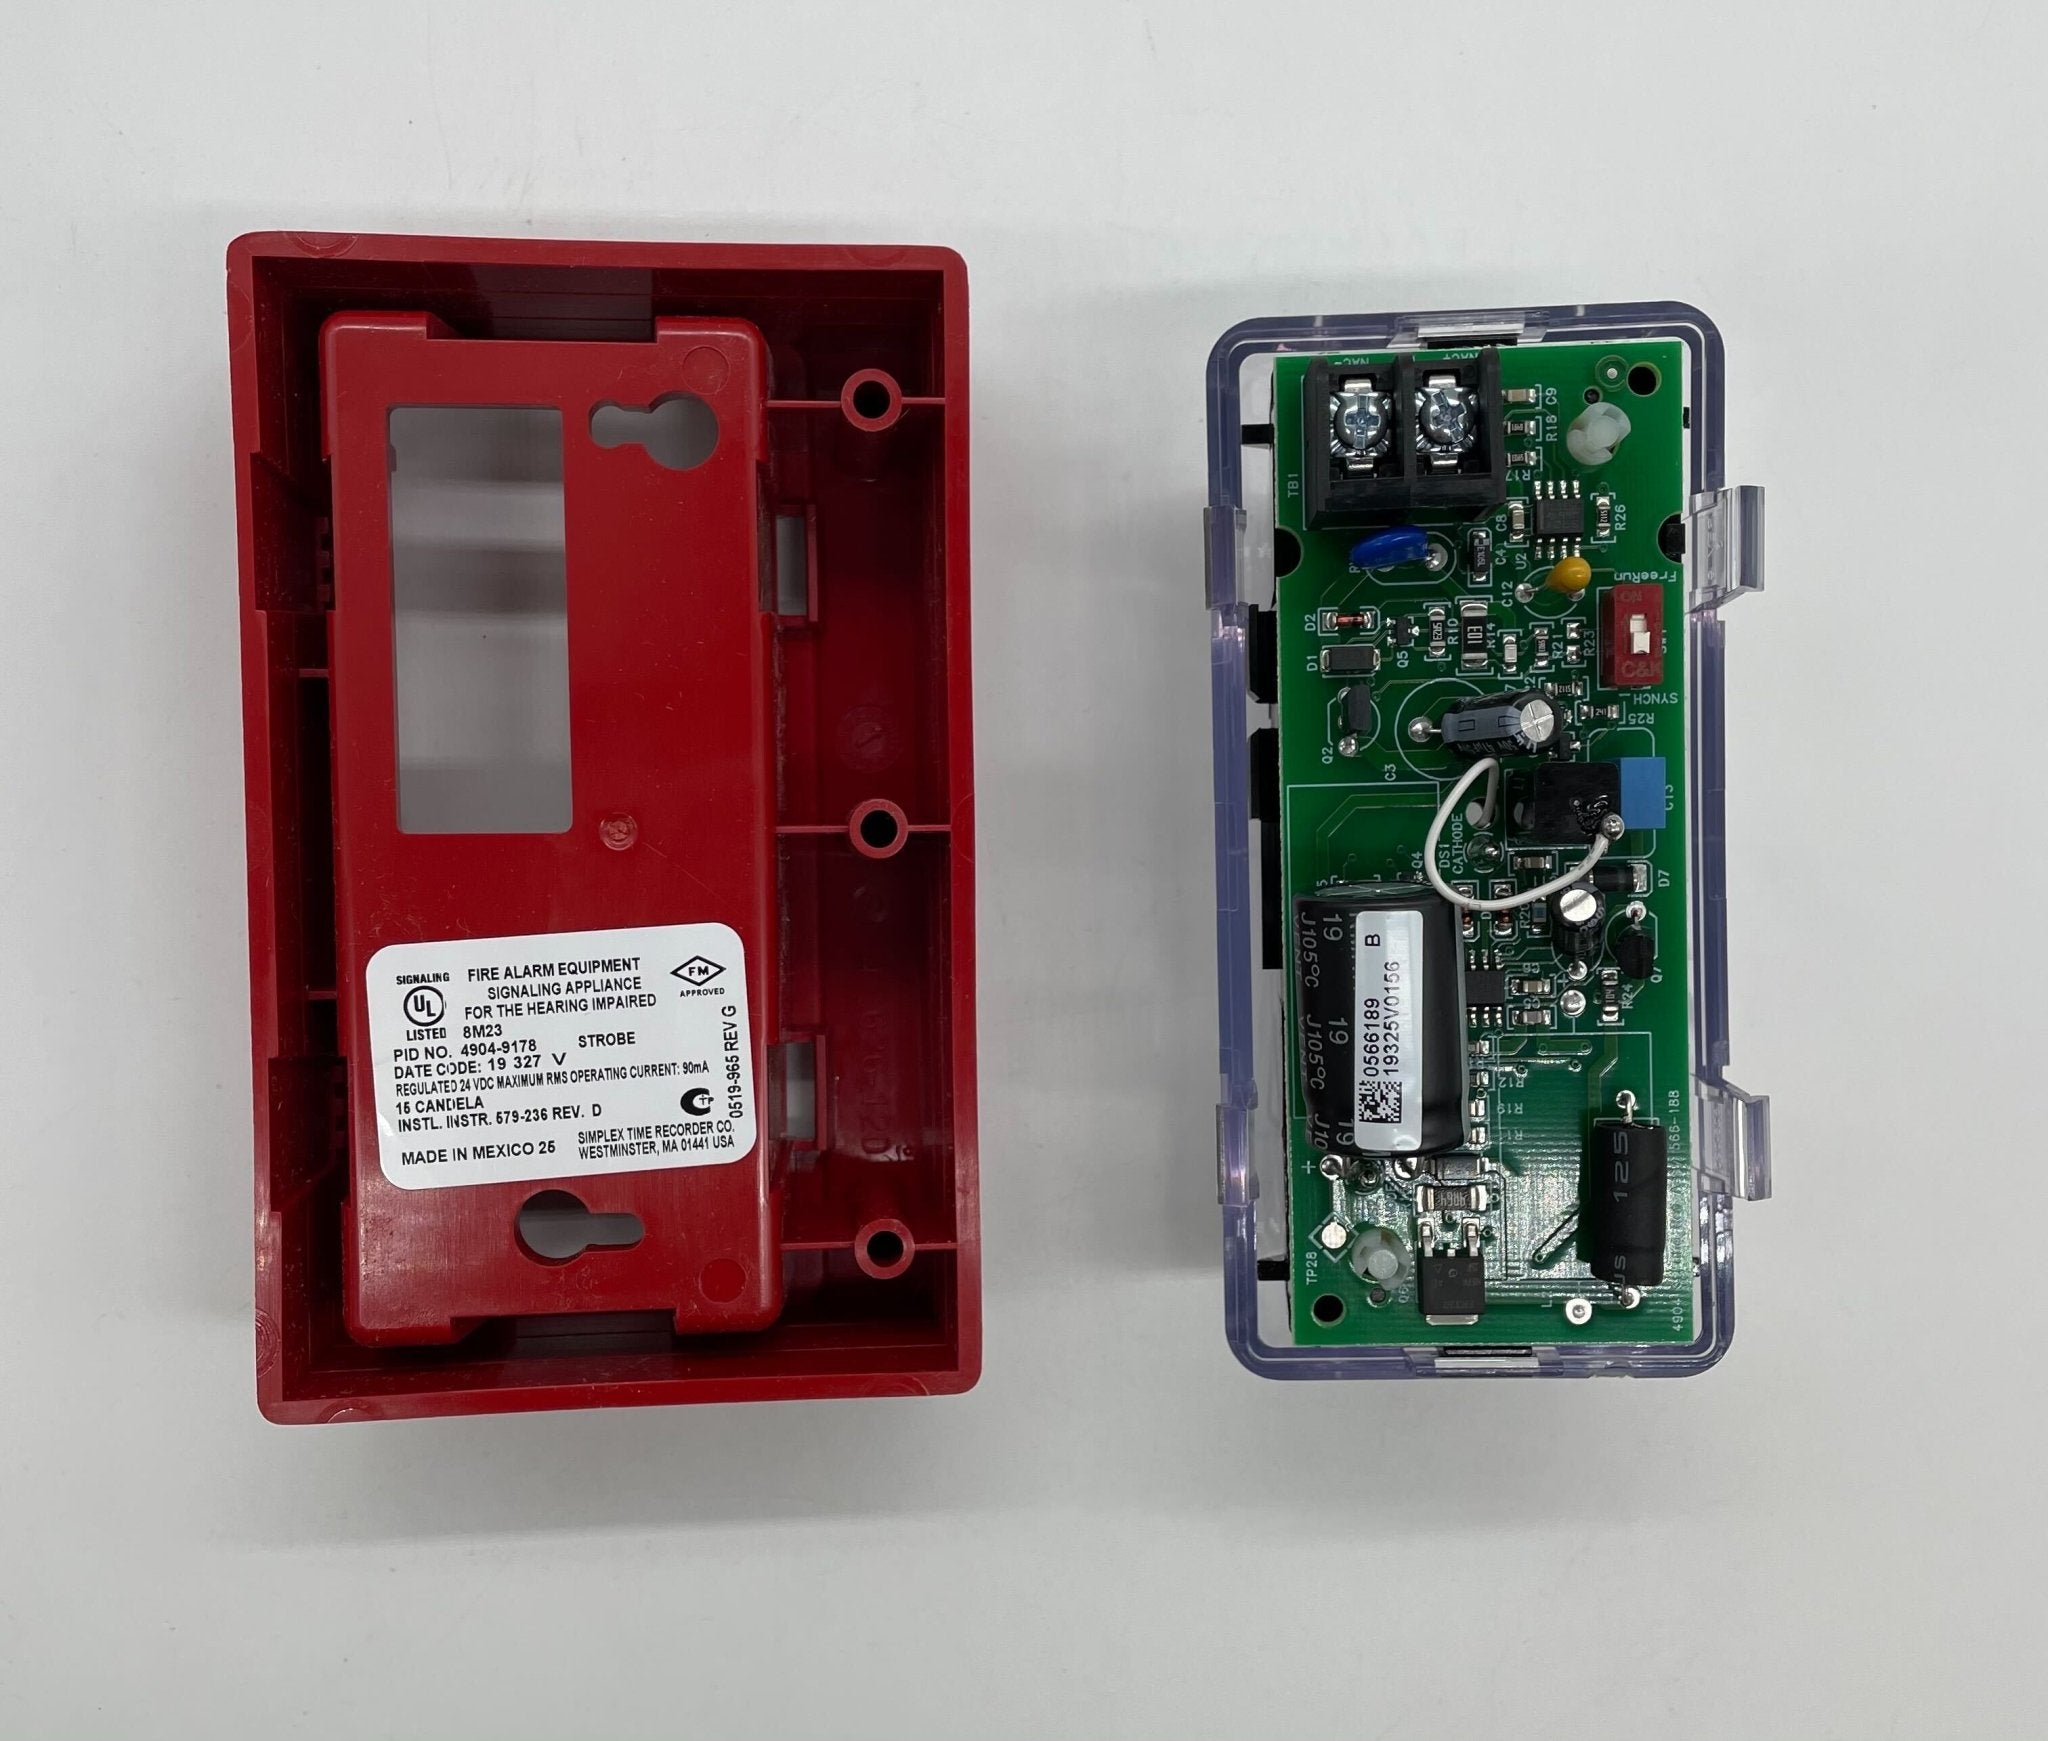 Simplex 4904-9178 Red Wall Mount Strobe - The Fire Alarm Supplier